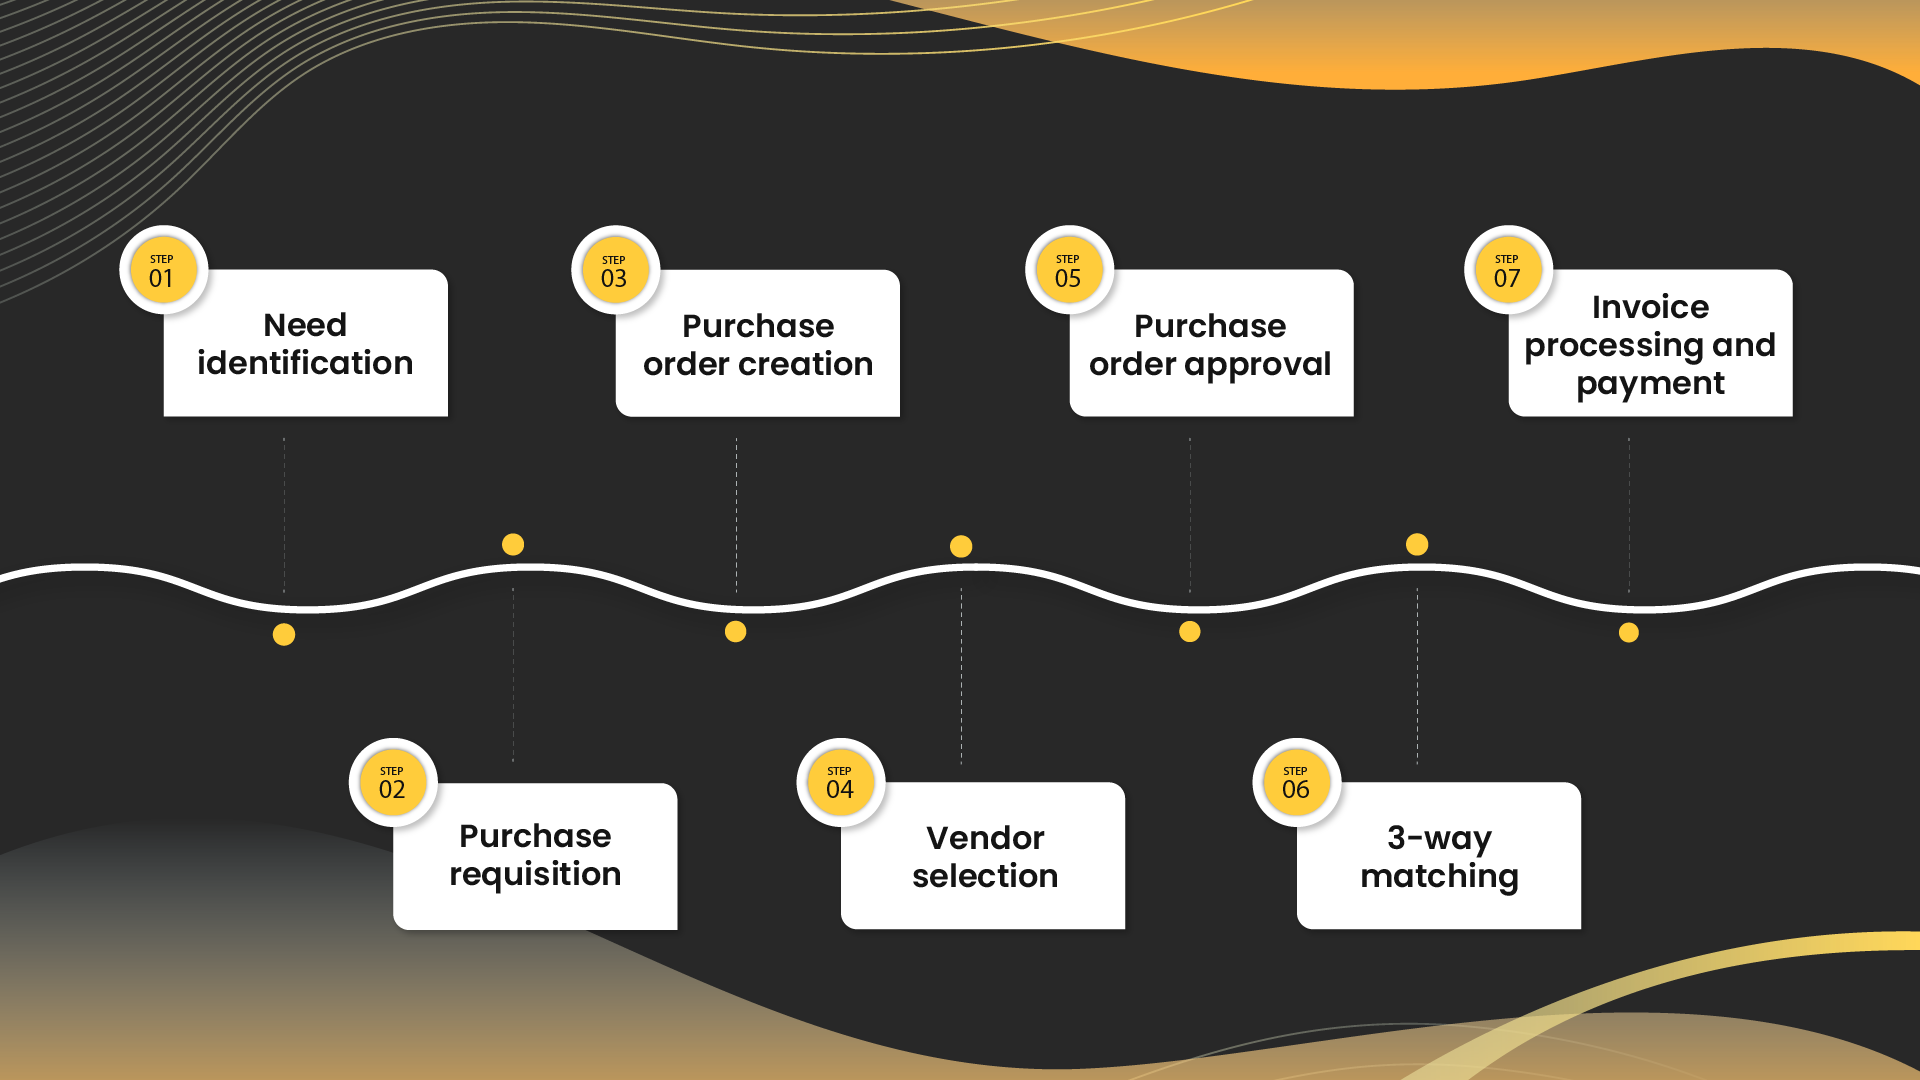 Steps involved in the purchase order process